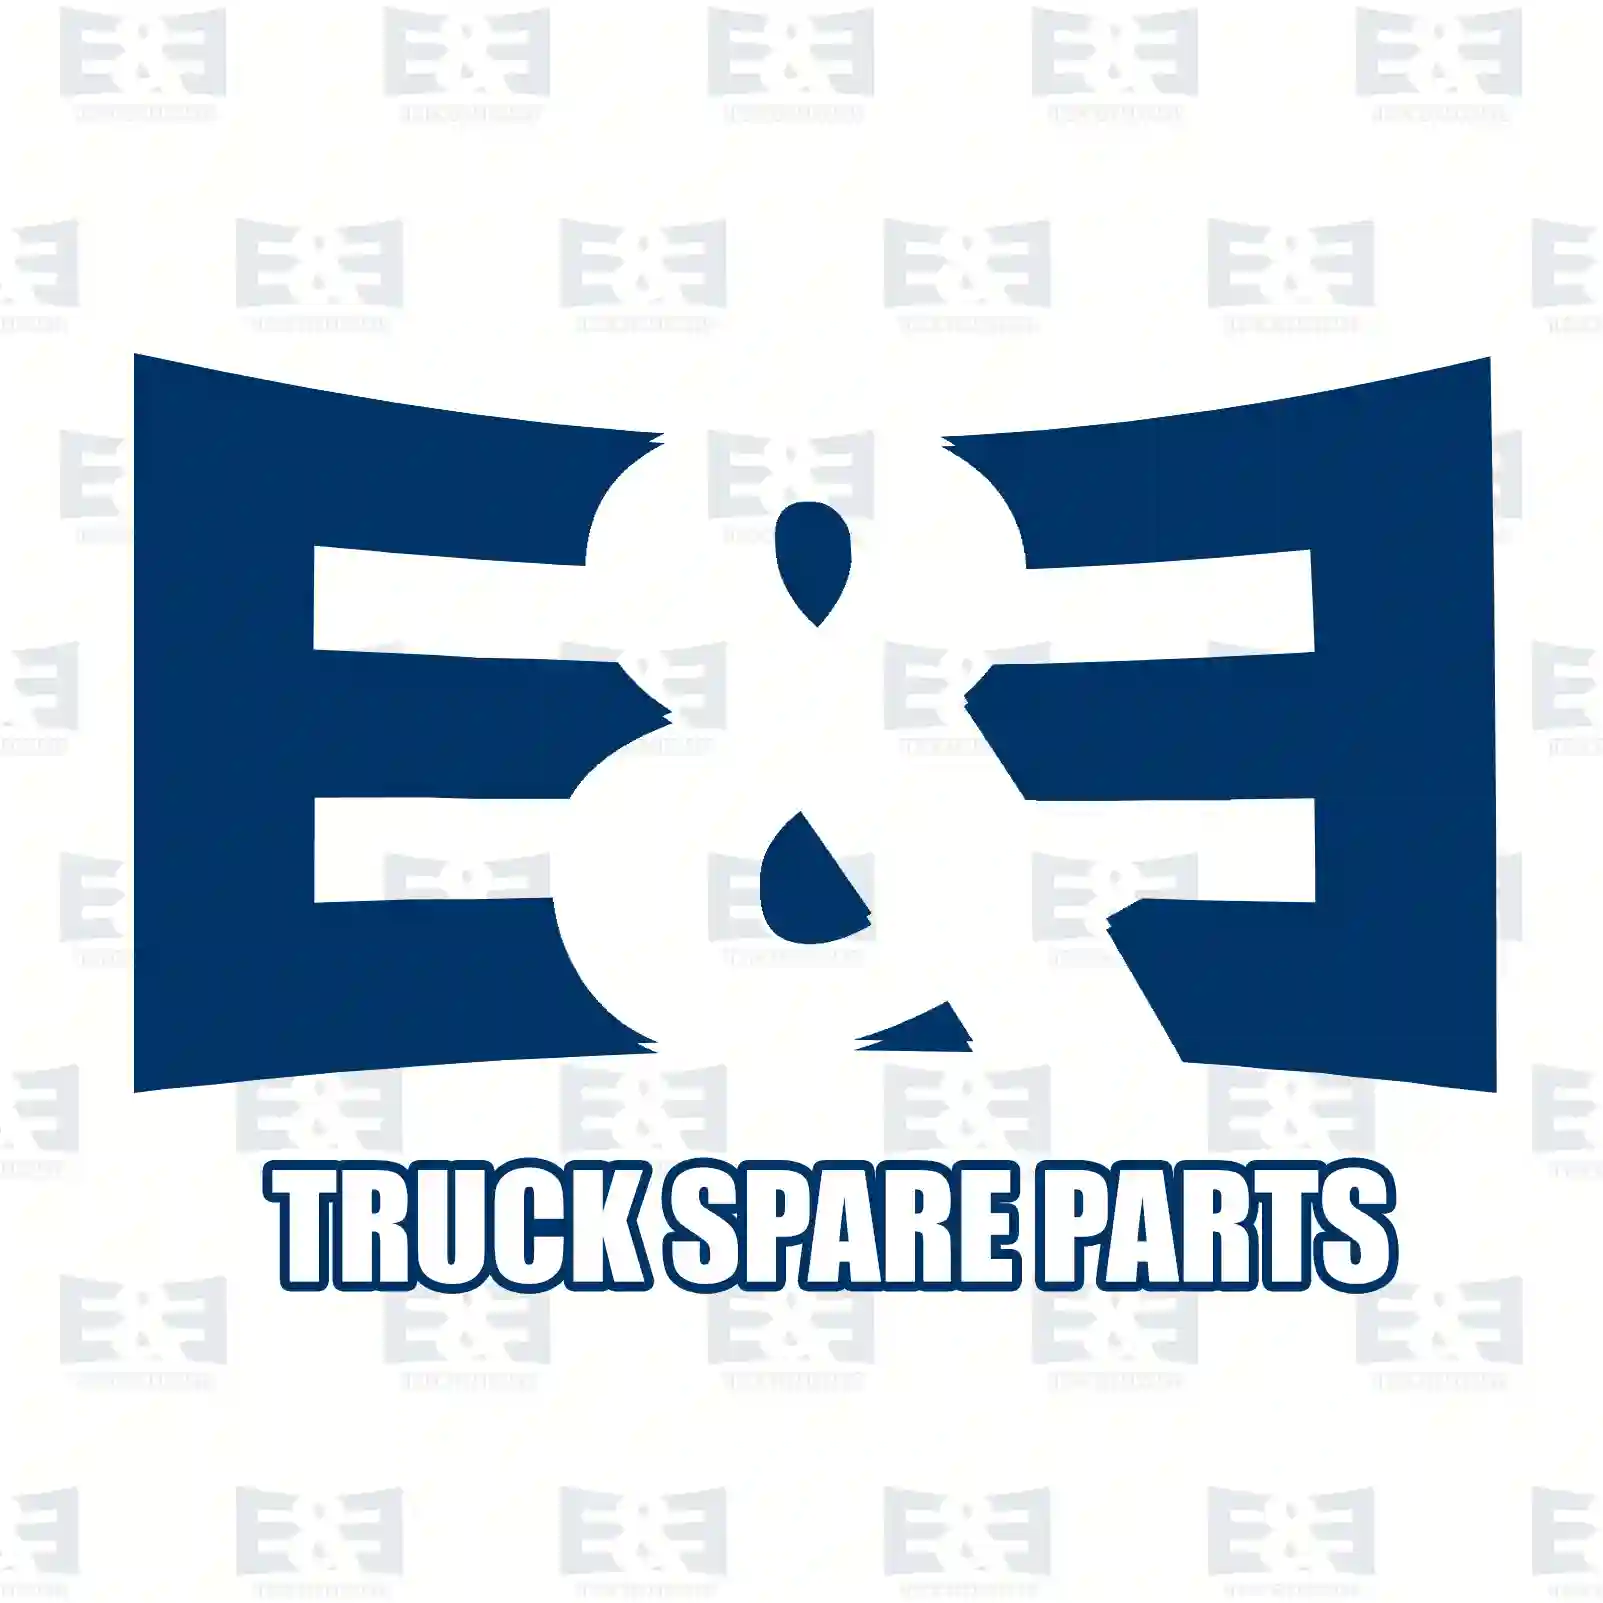  Charger, starter battery, WEEE-Reg-No. DE 57605858 || E&E Truck Spare Parts | Truck Spare Parts, Auotomotive Spare Parts